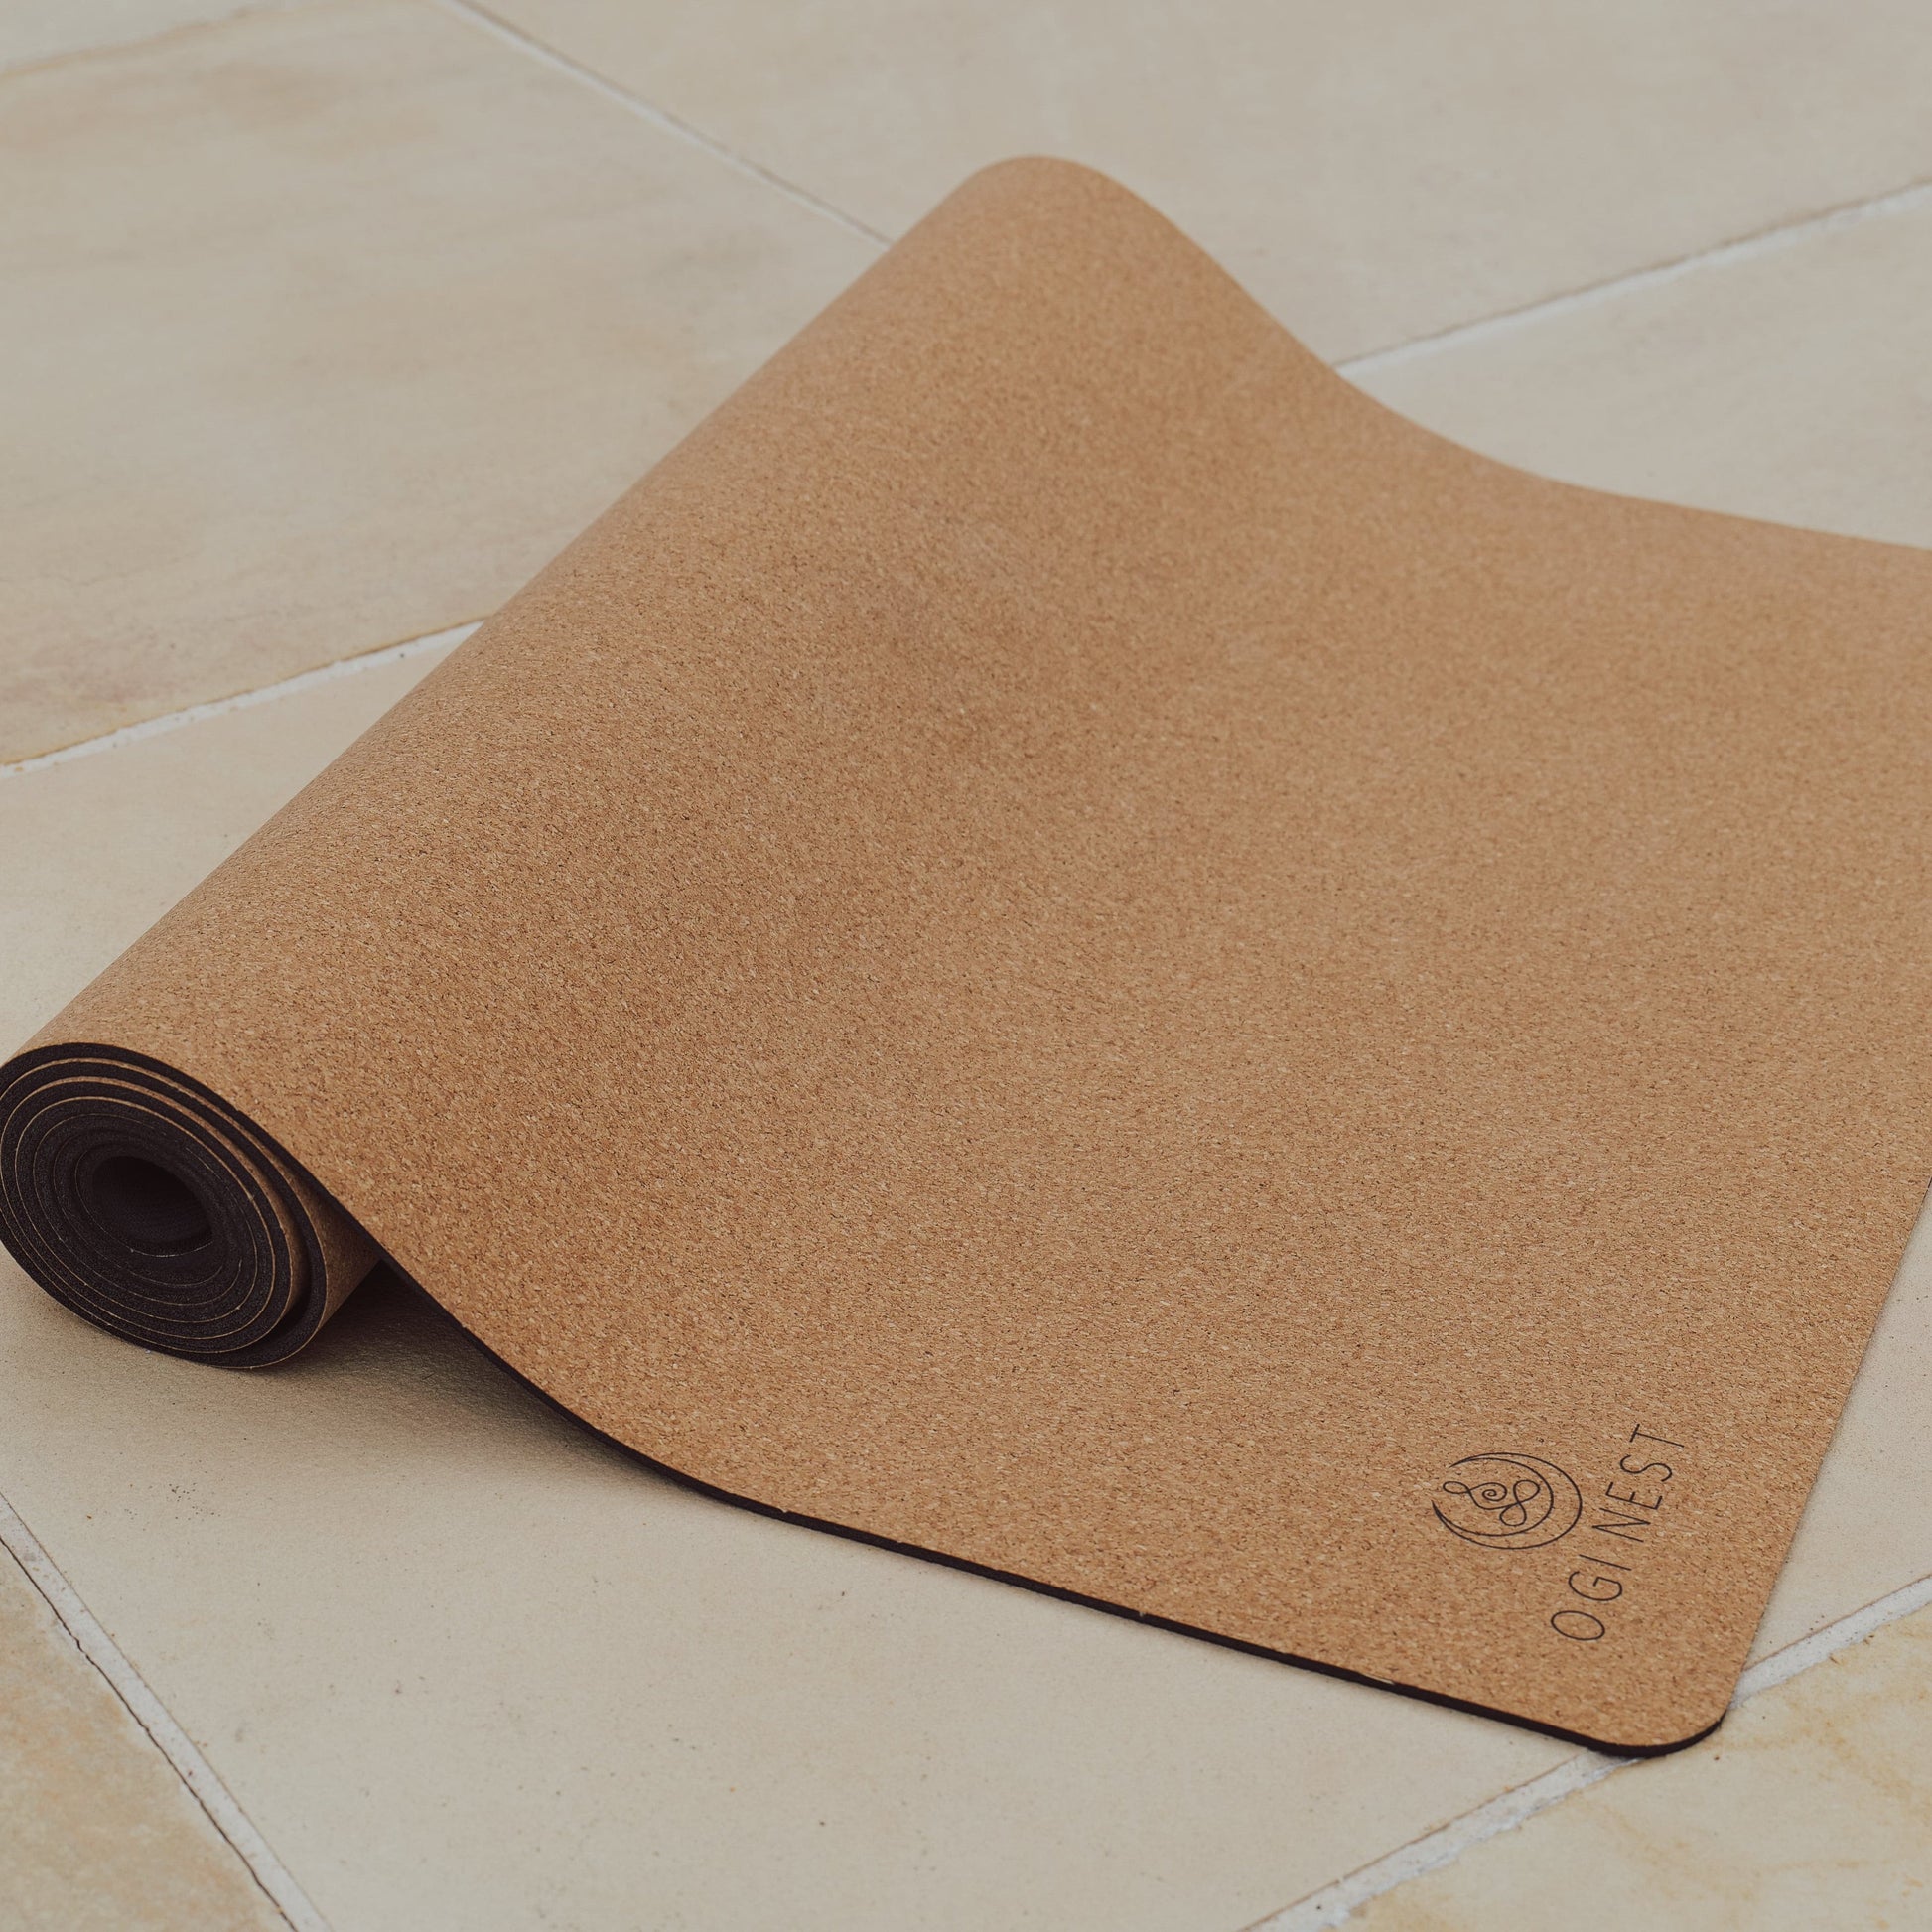 Original cork and natural rubber yoga mat. No detailing except for logo. Partially rolled up.